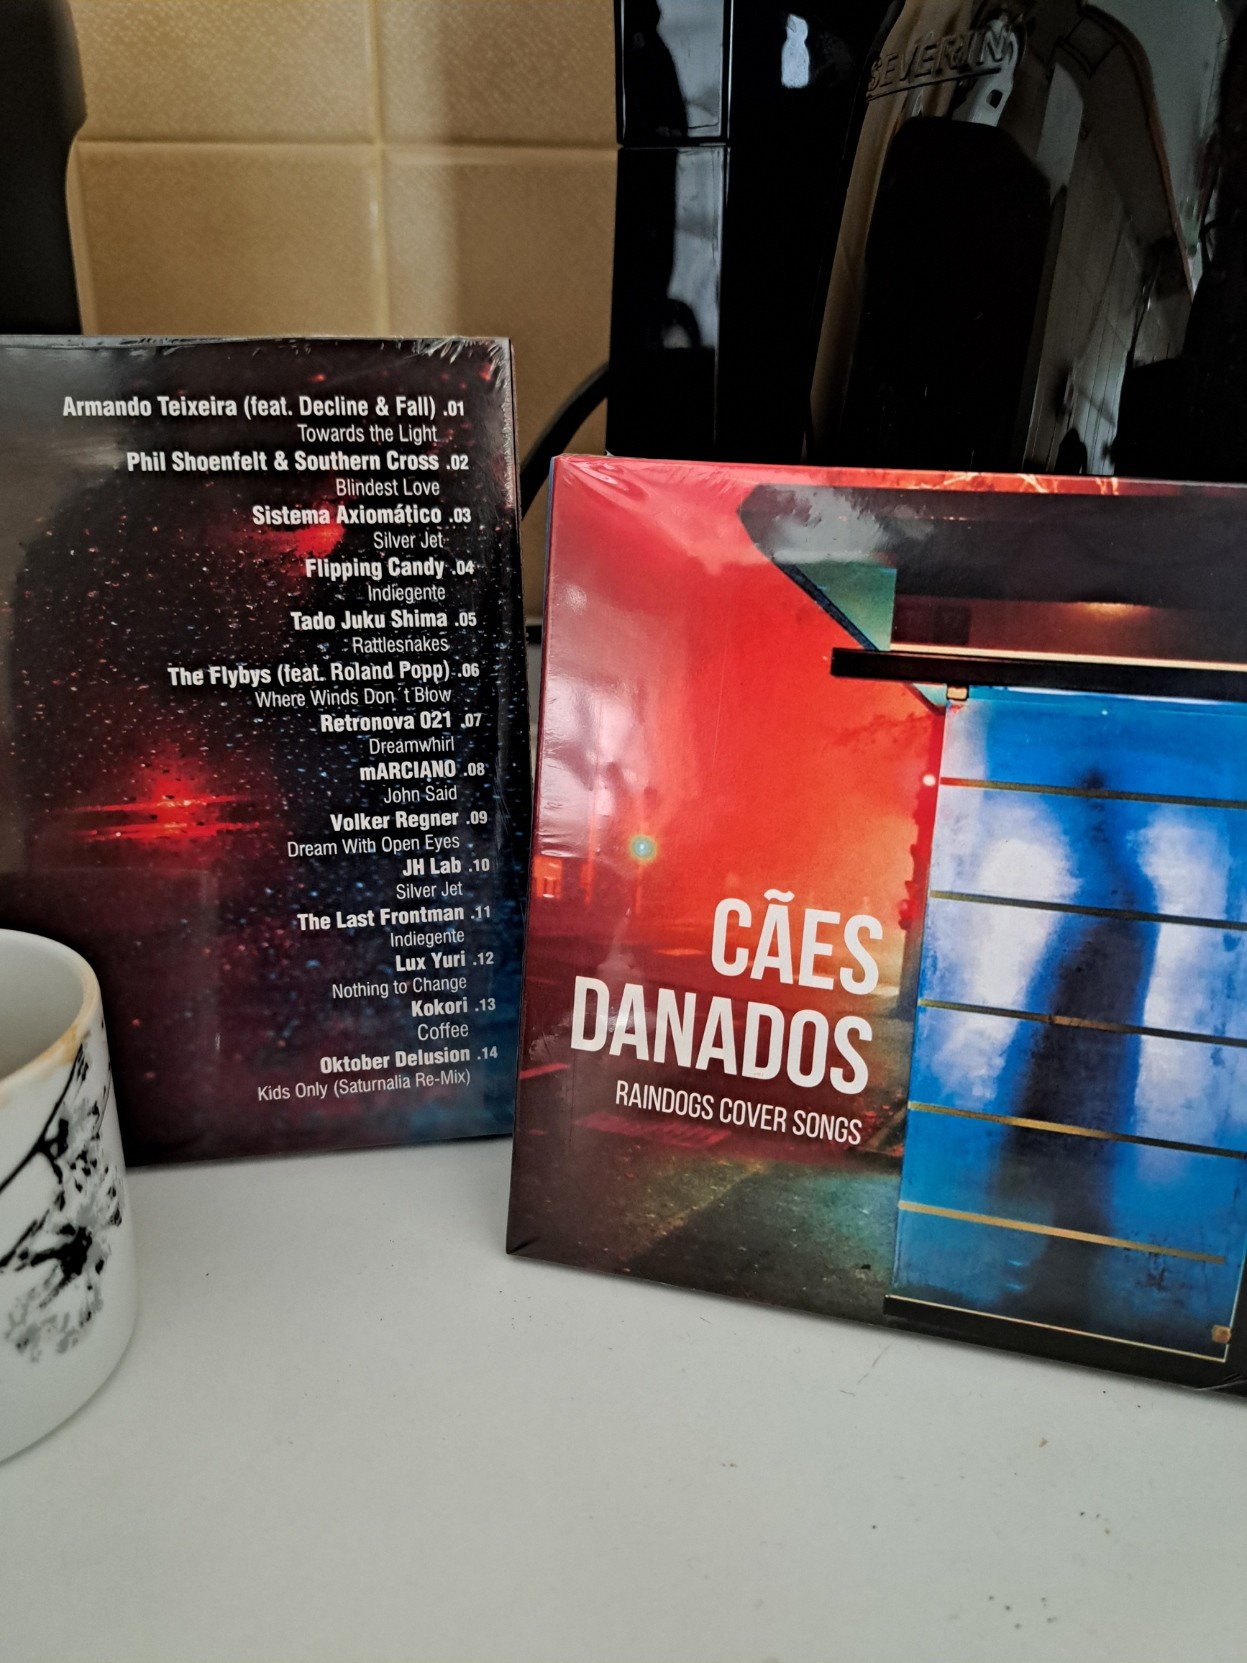 Two sealed copies of "Cães Danados - Raindogs Cover Songs" on CD, one showing the front and the other the back cover. They are in front of a coffee machine and next to a coffee cup.  The thirteenth track, from Kokori, is named "Coffee".